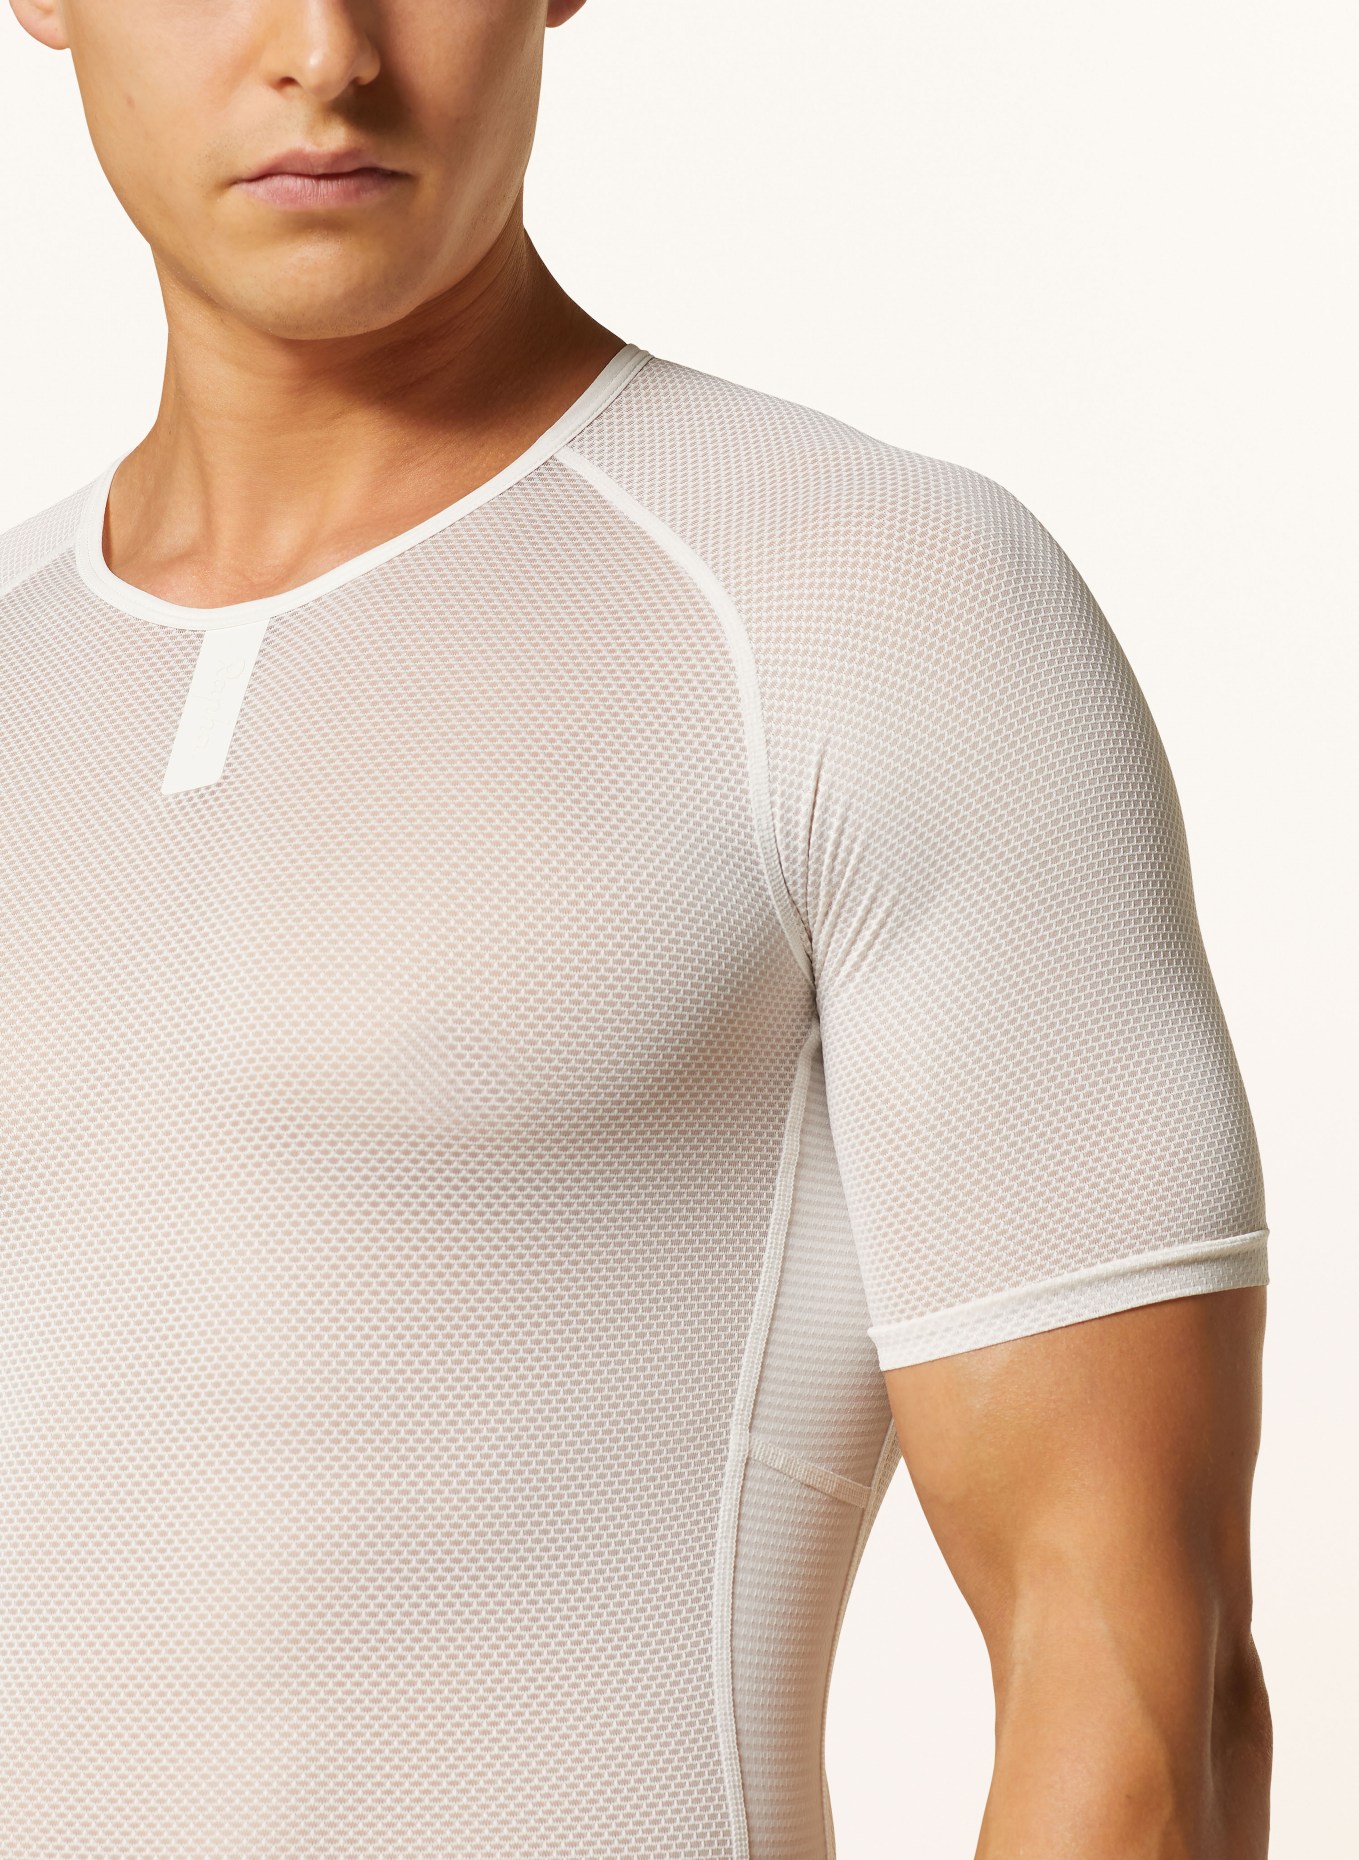 Rapha Functional underwear shirt, Color: WHITE (Image 4)